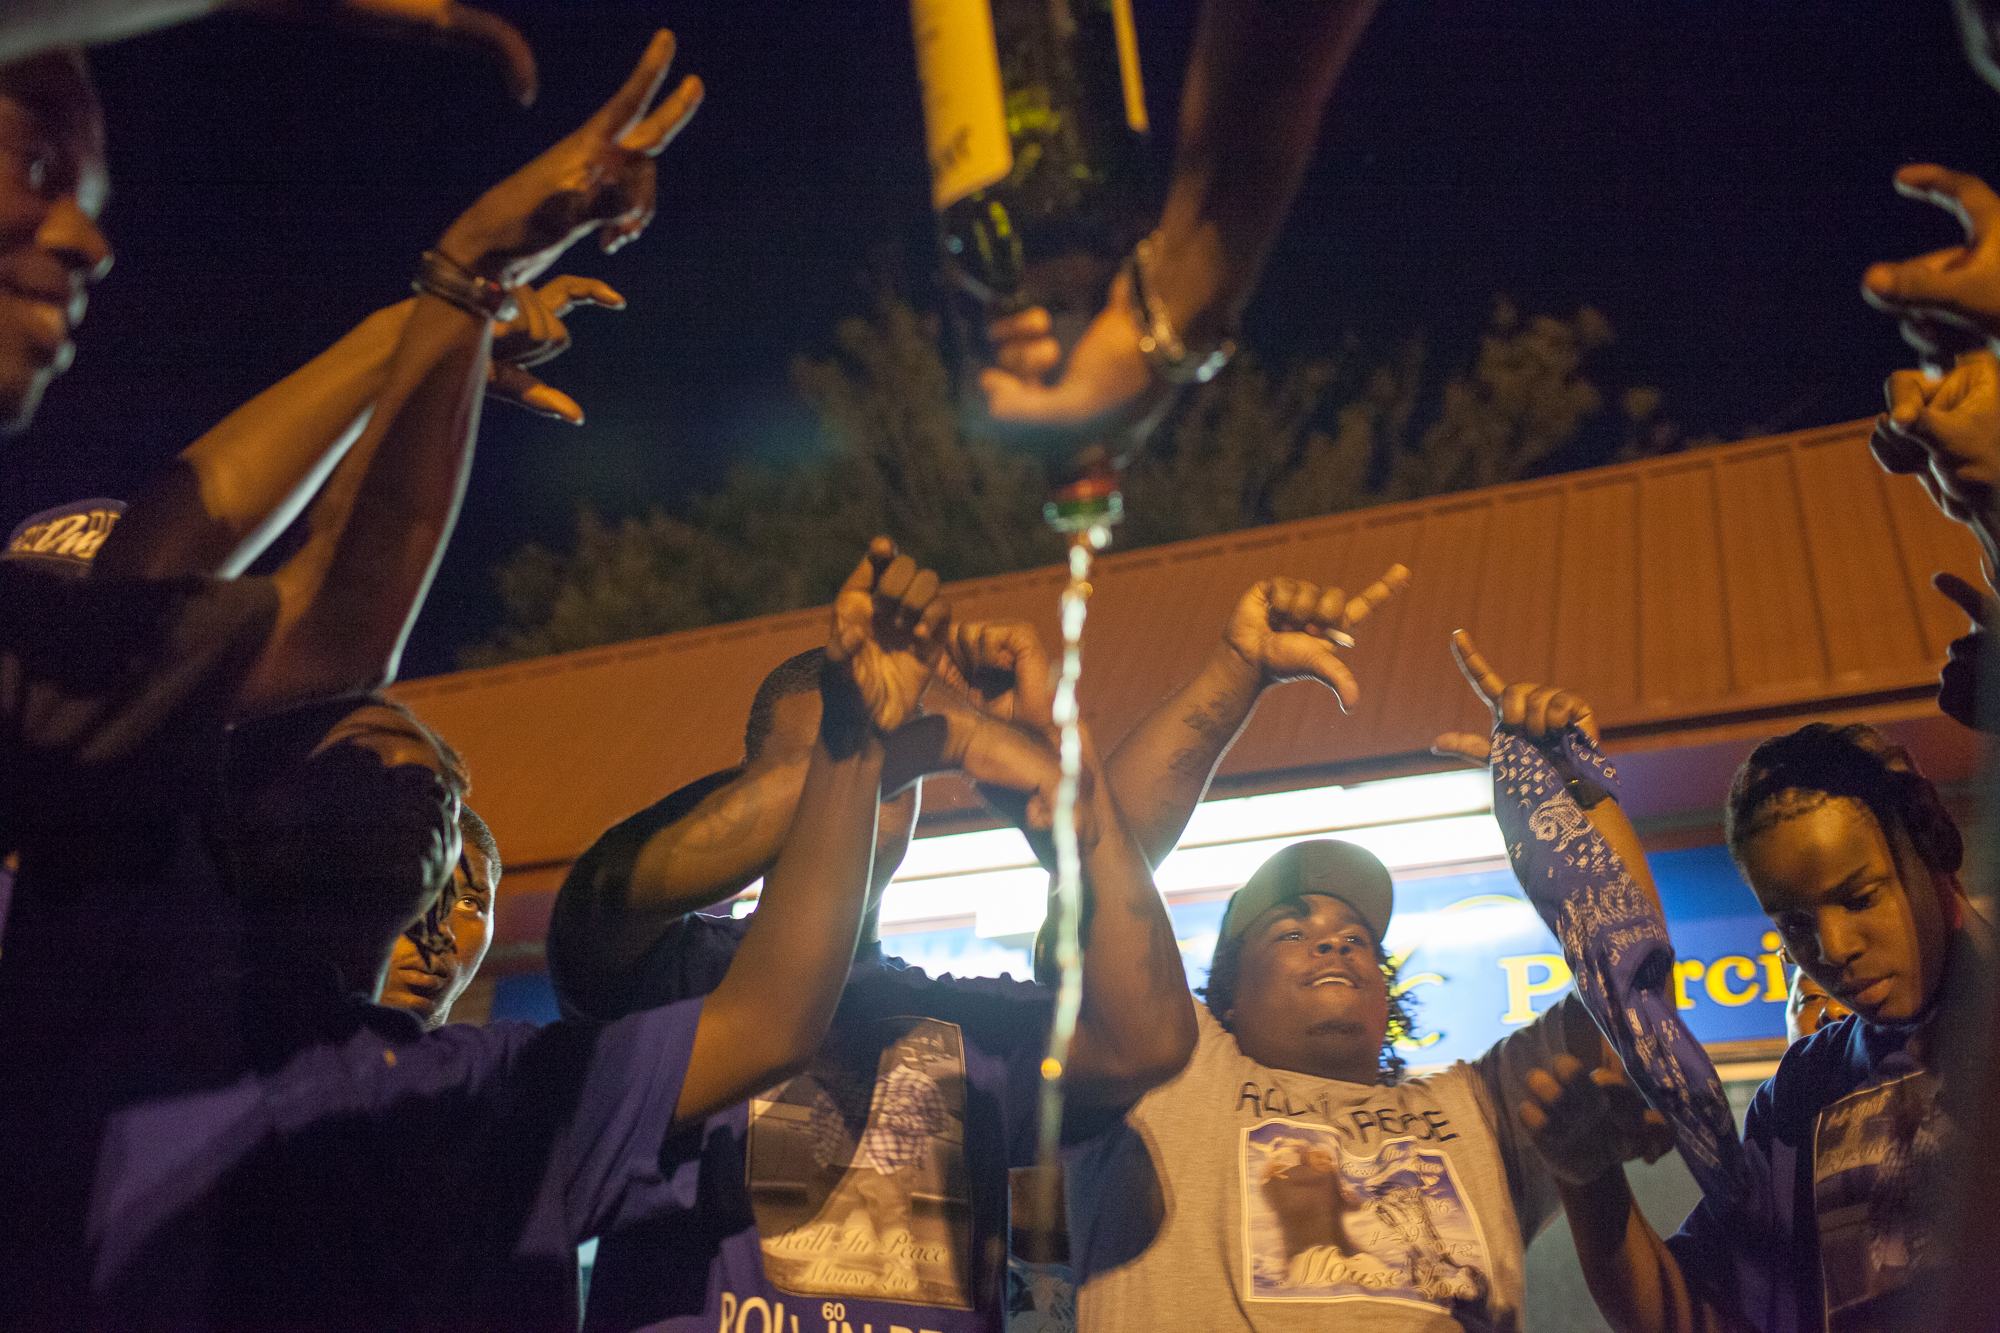  Young men who identify as Crips gather in a circle and spill liquor to mourn Maurice Streeter, who was shot and killed in April 2013. Neighborhood cliques and gangs offer young people a sense of purpose and family in neighborhoods torn apart by pove